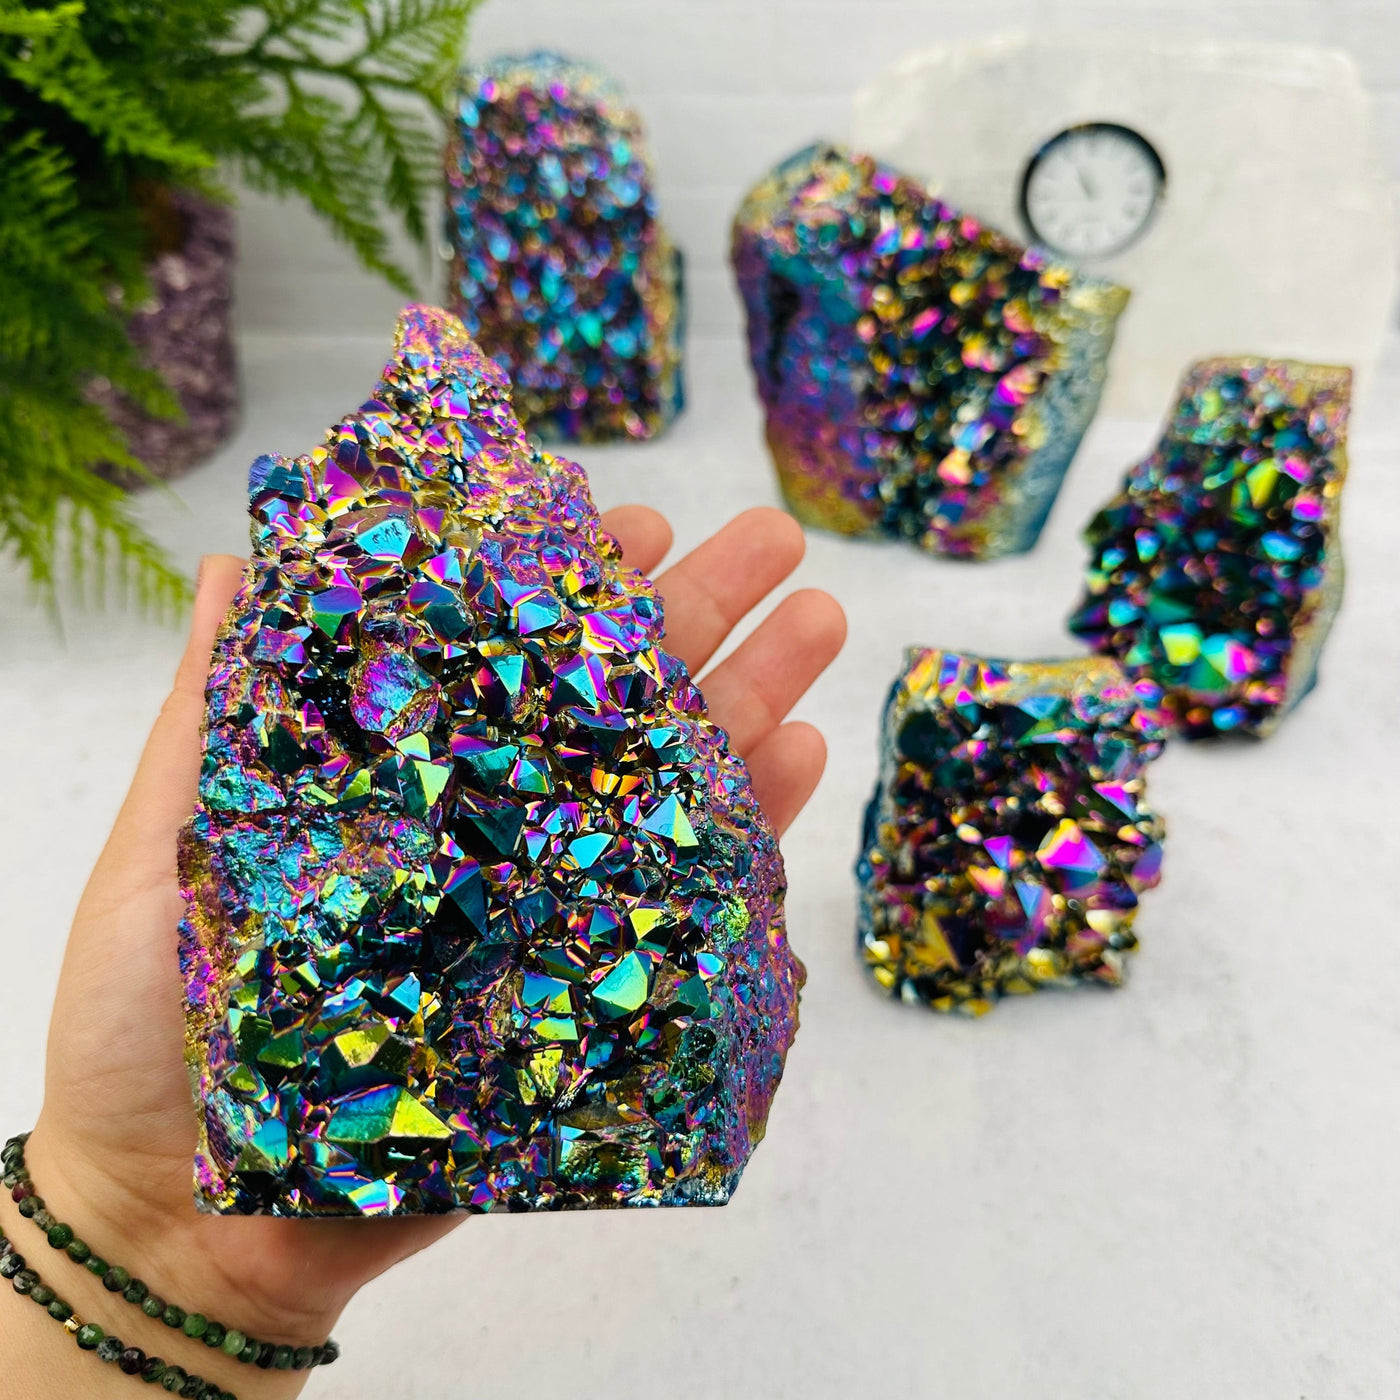 Amethyst Druzy Cutbase with Rainbow Titanium Finish in hand for size reference 